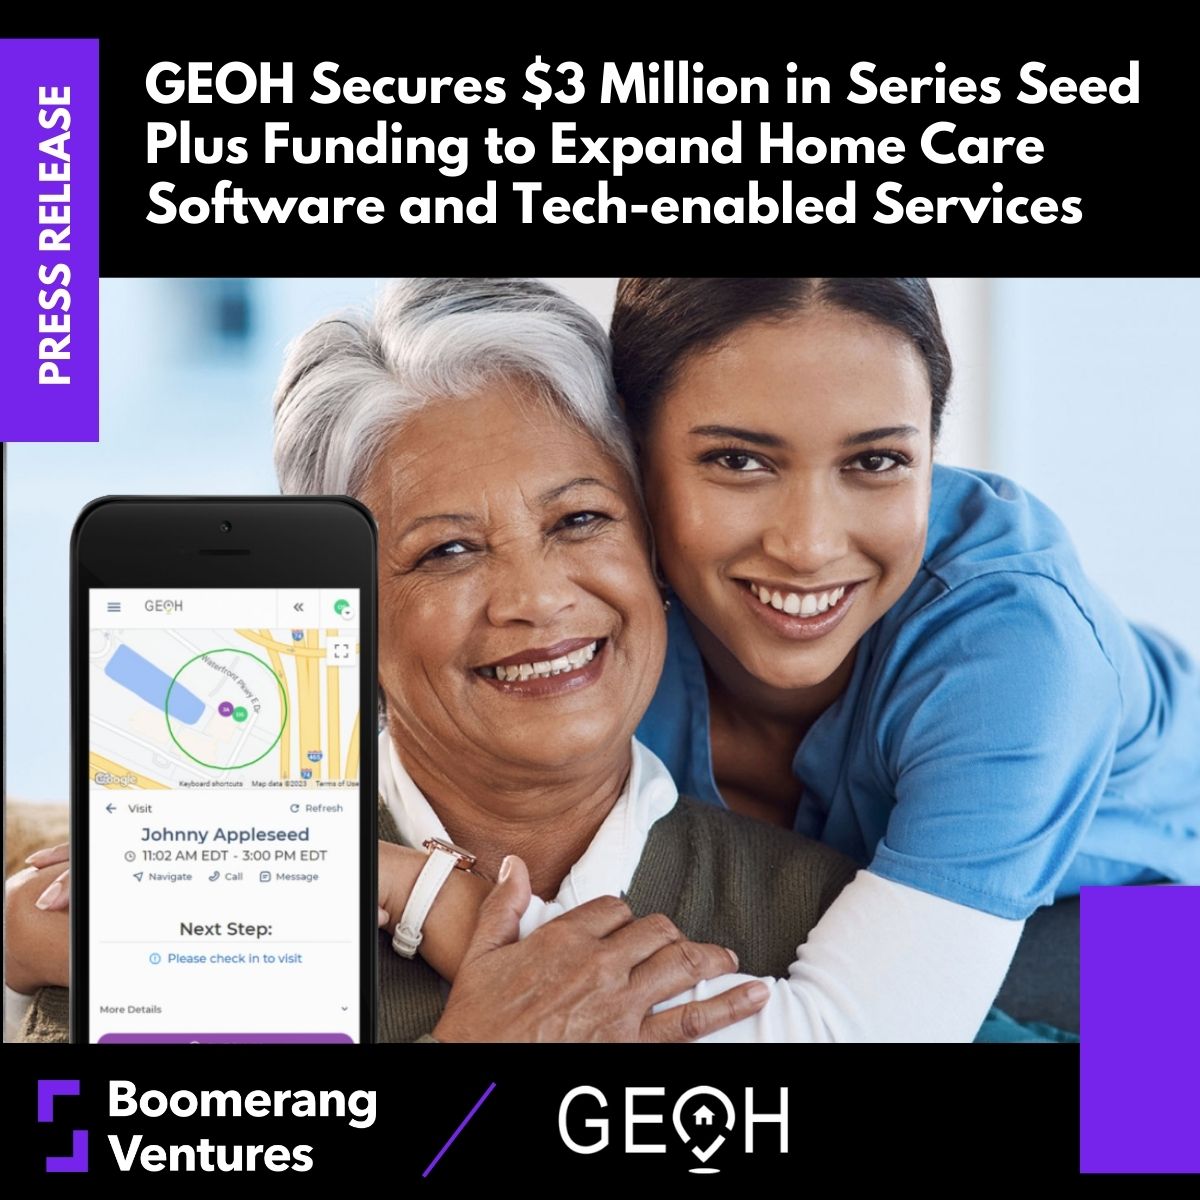 Press Release: GEOH Secures $3 Million in Series Seed Plus Funding to Expand Home Care Software and Tech-enabled Services